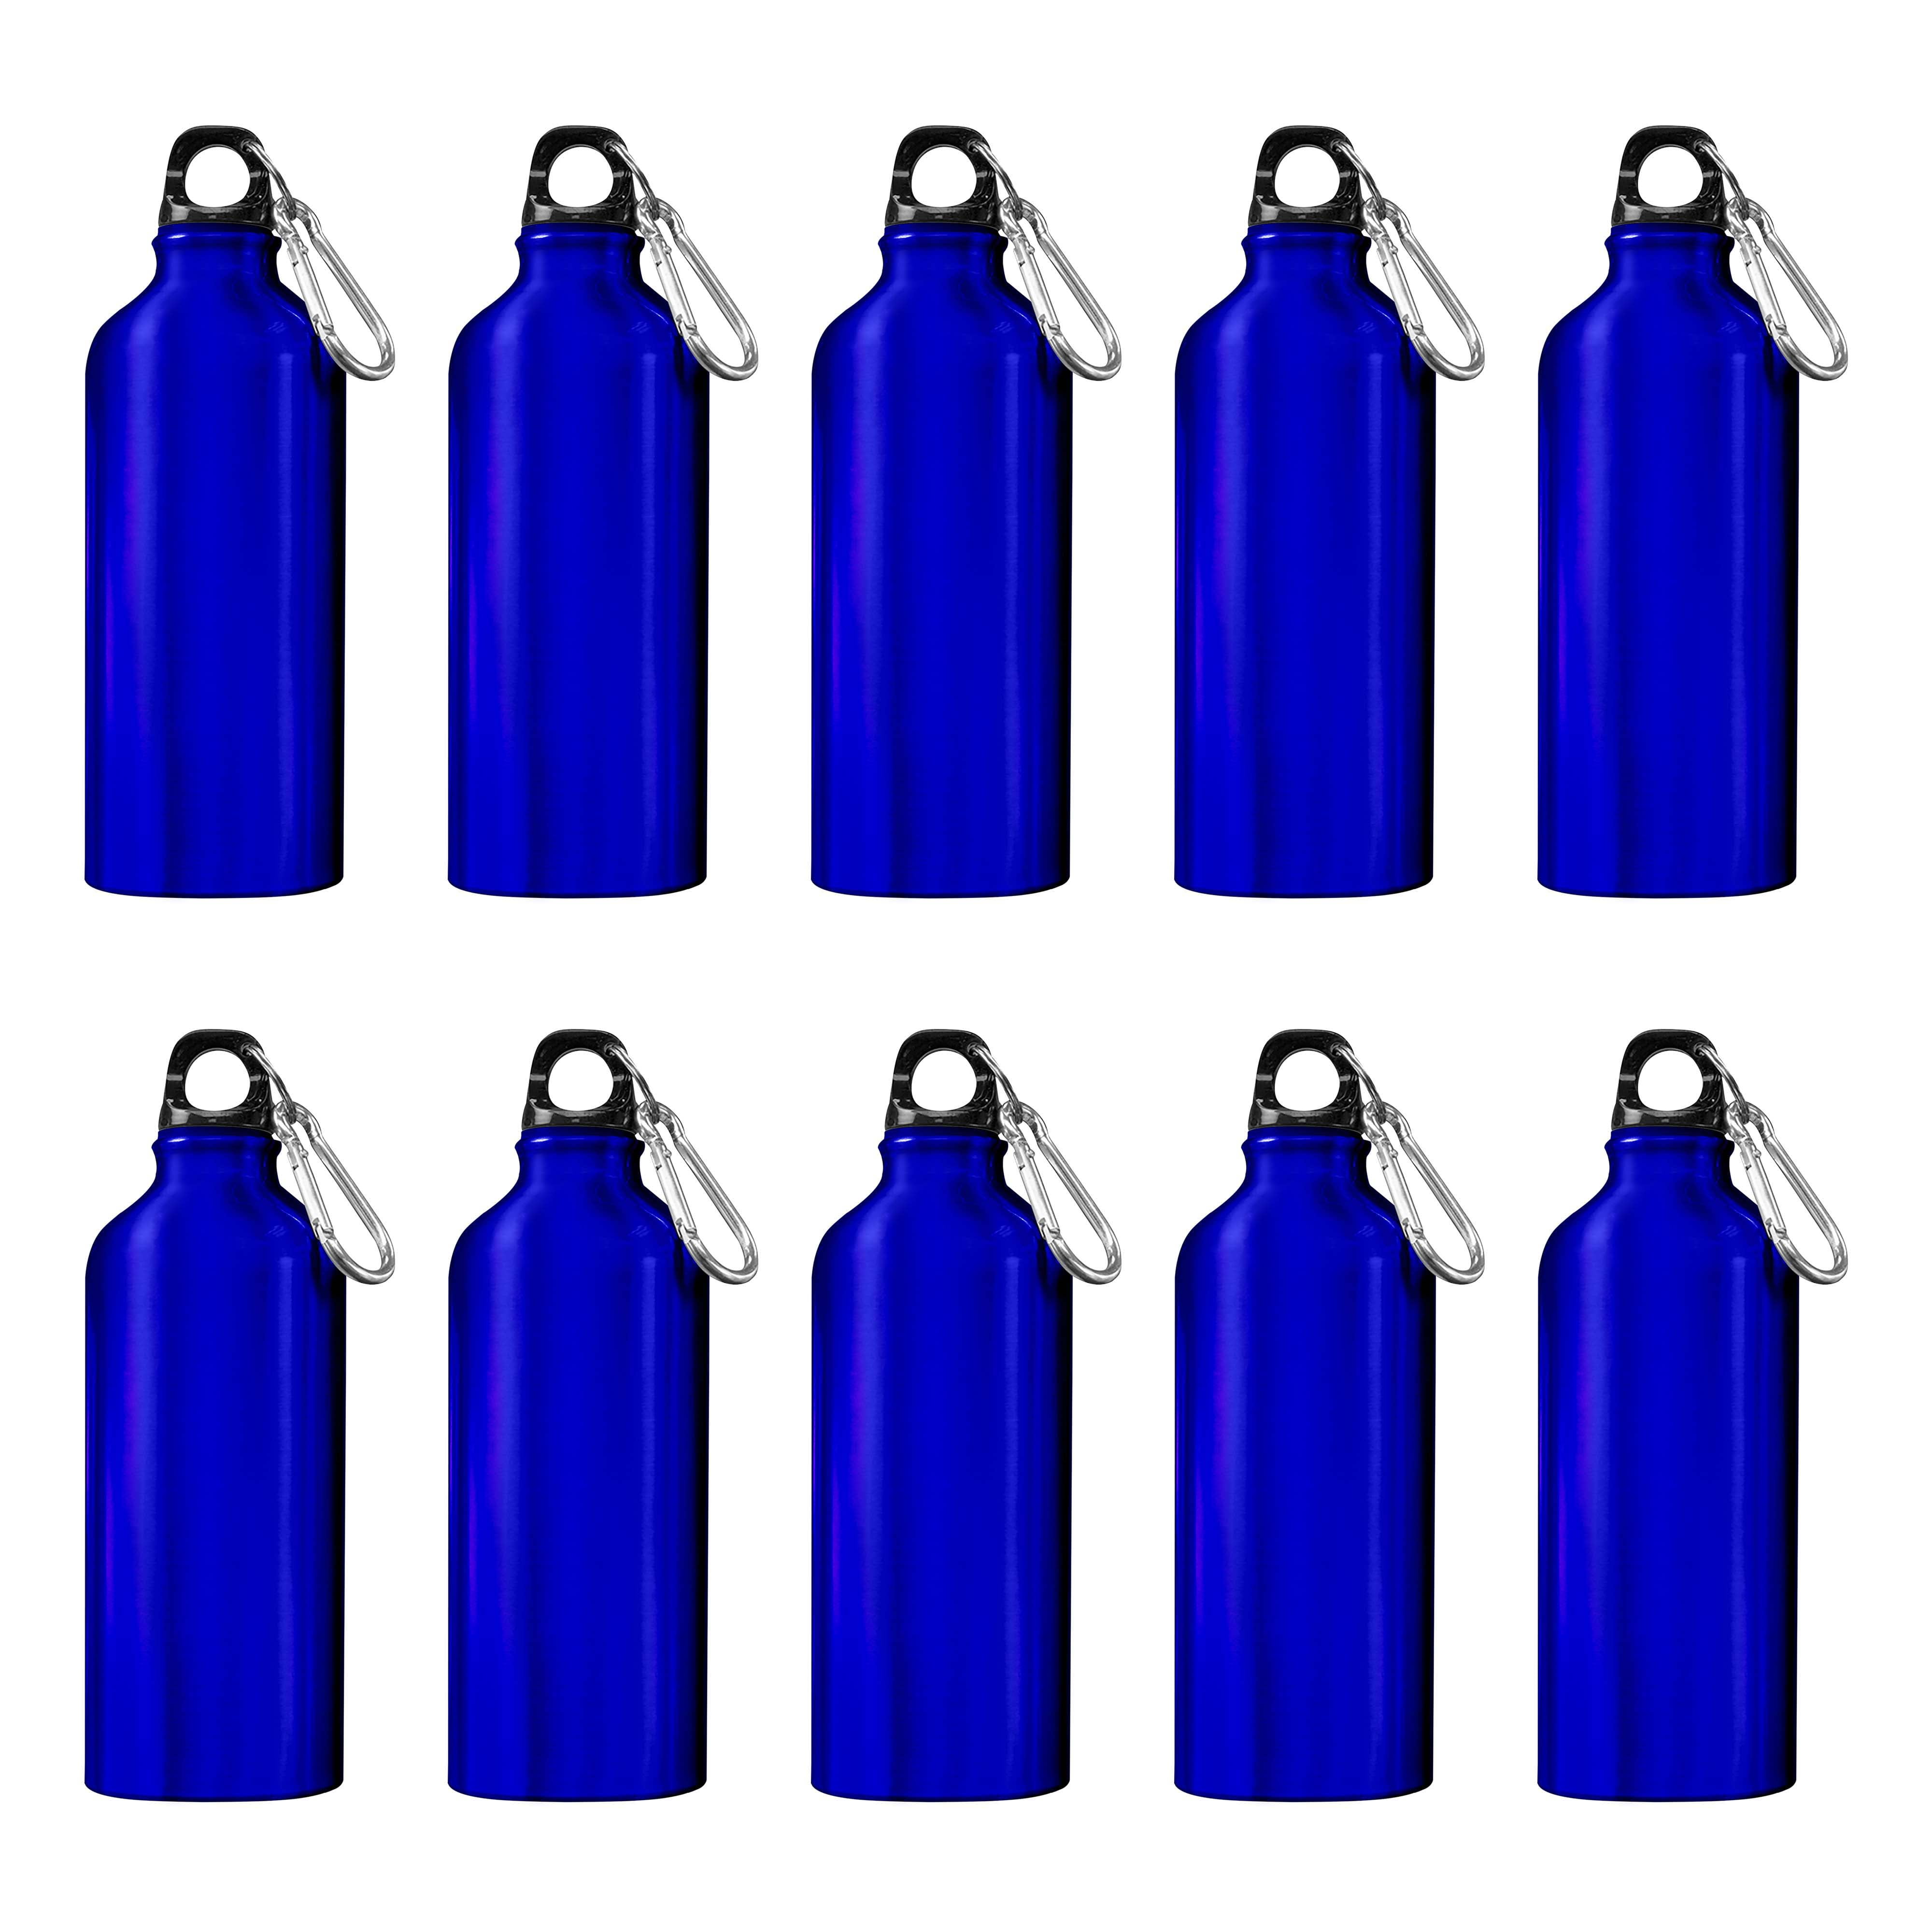 144 Neon Water Sports Bottles for Bikes | MEGA Bulk Pack, 7.5 inches, Wrist  Strap | Awesome Summer B…See more 144 Neon Water Sports Bottles for Bikes